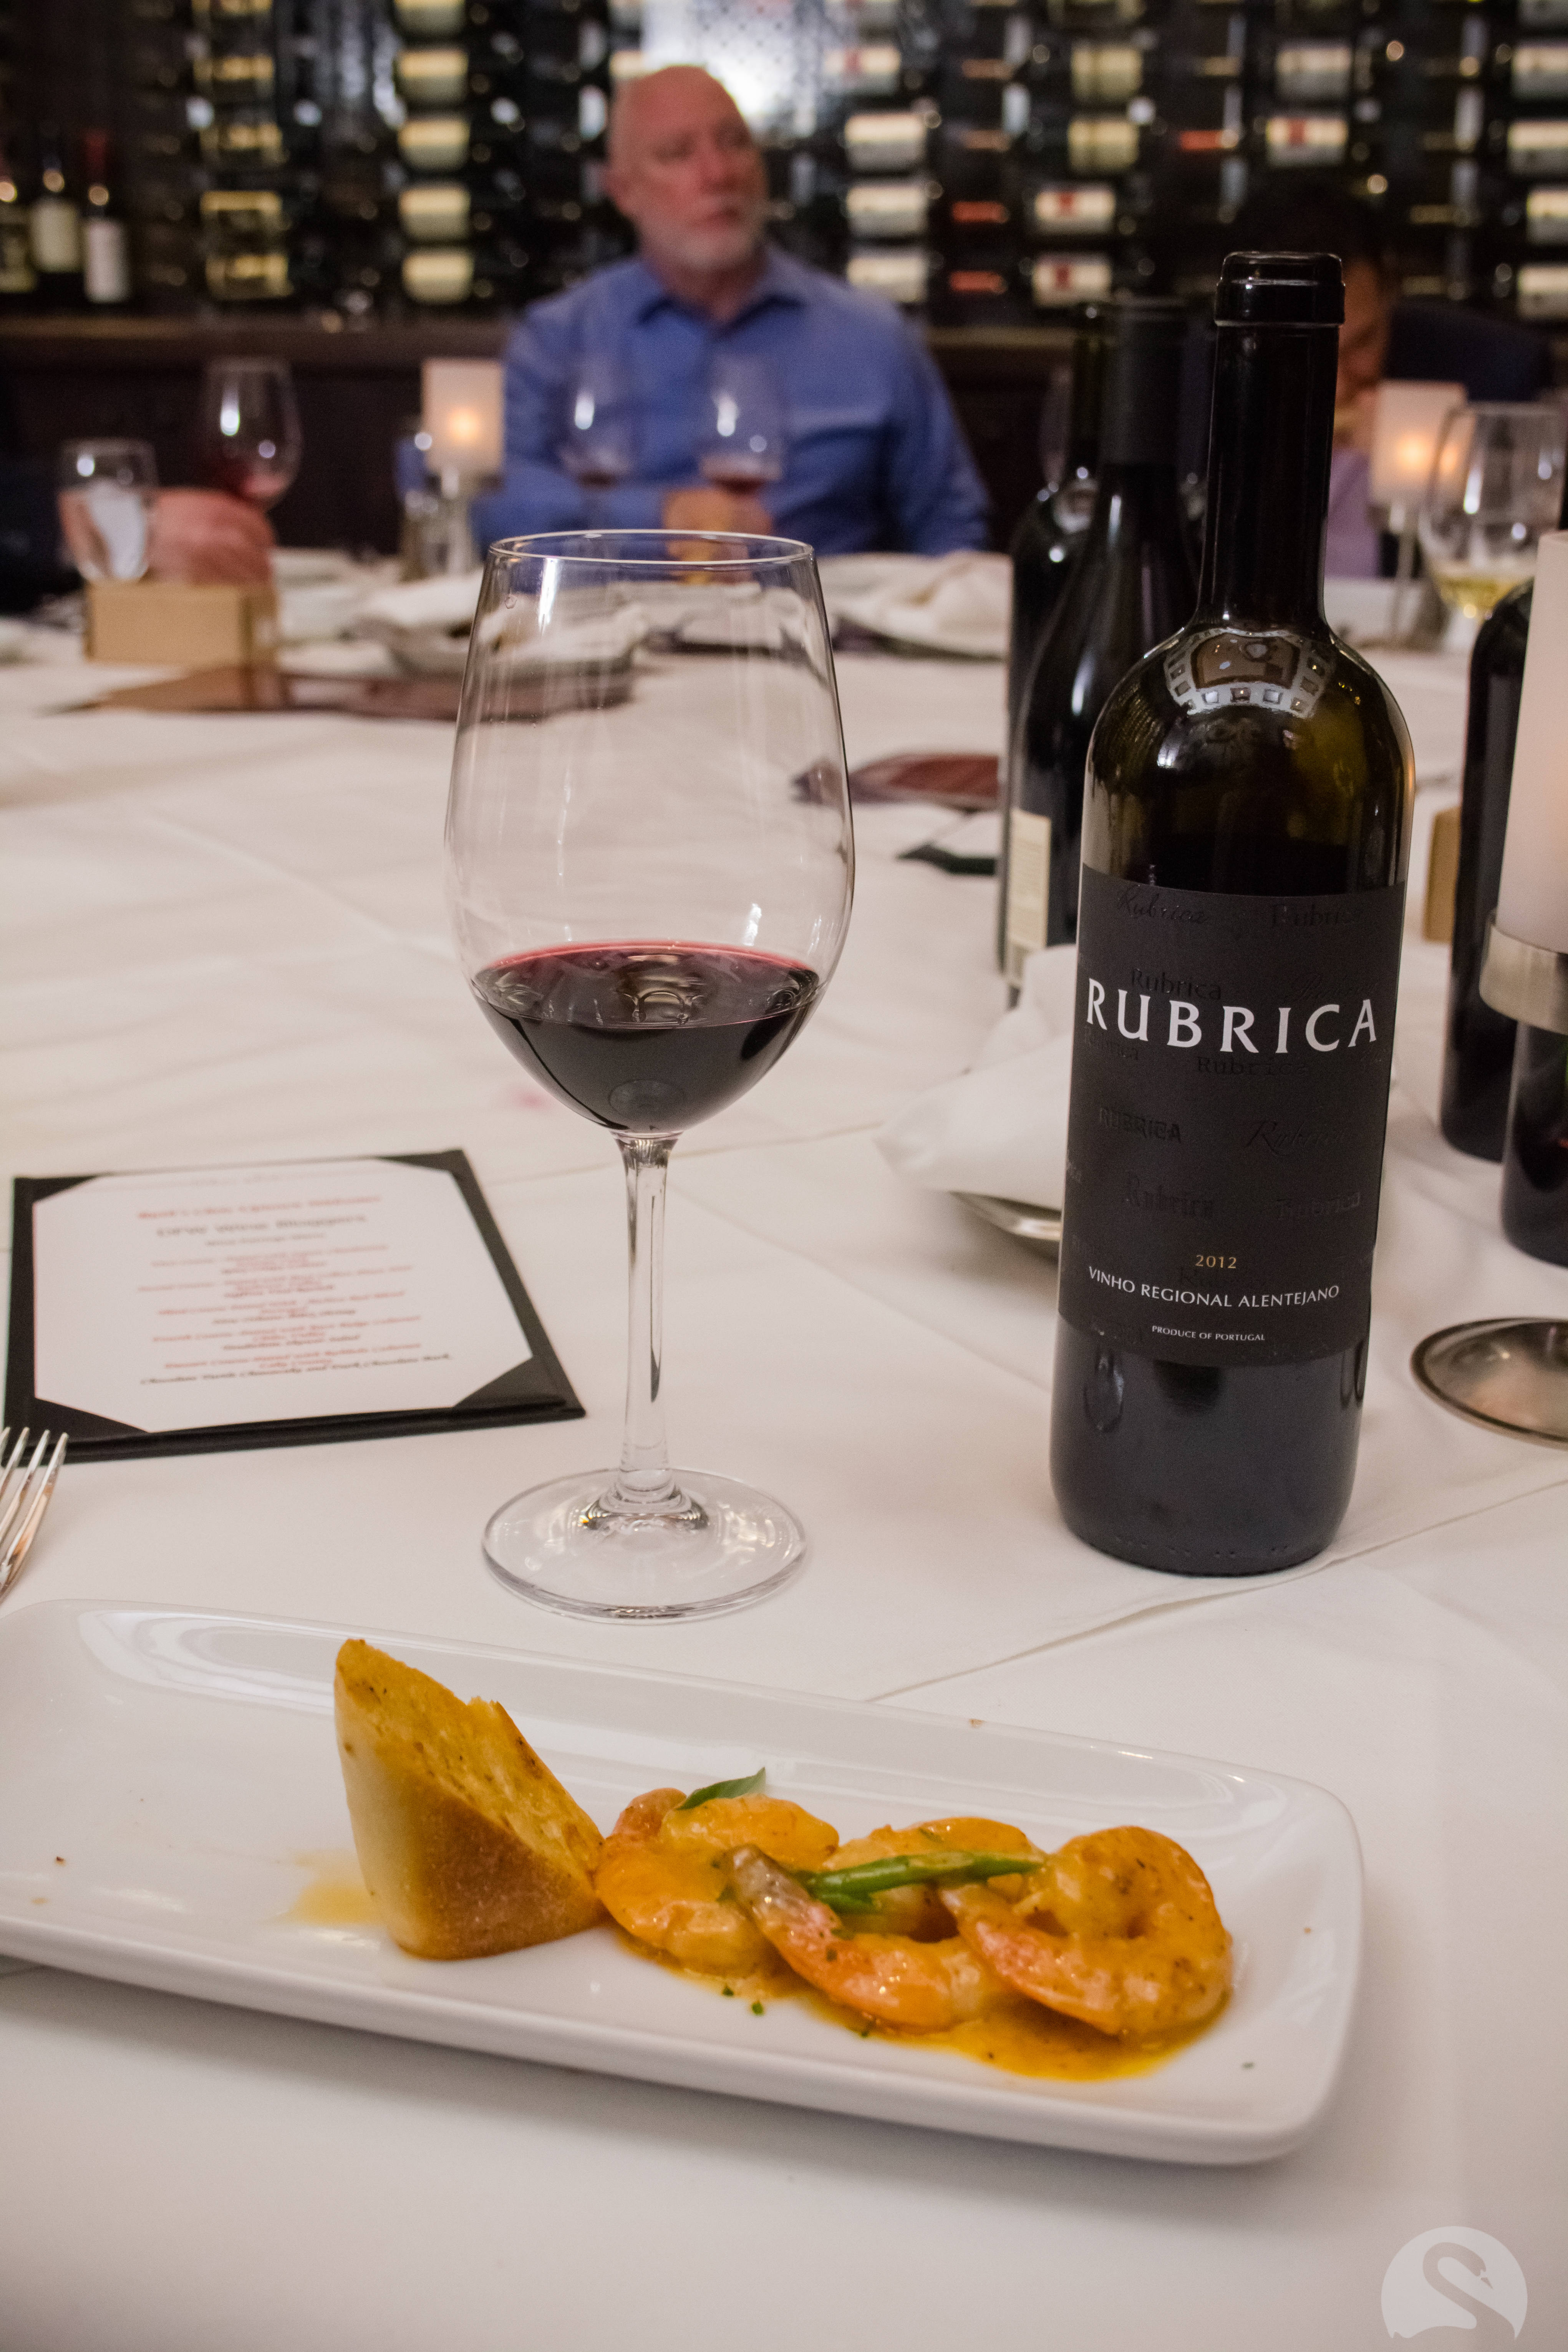 Spicy Shrimp paired with Rubrica